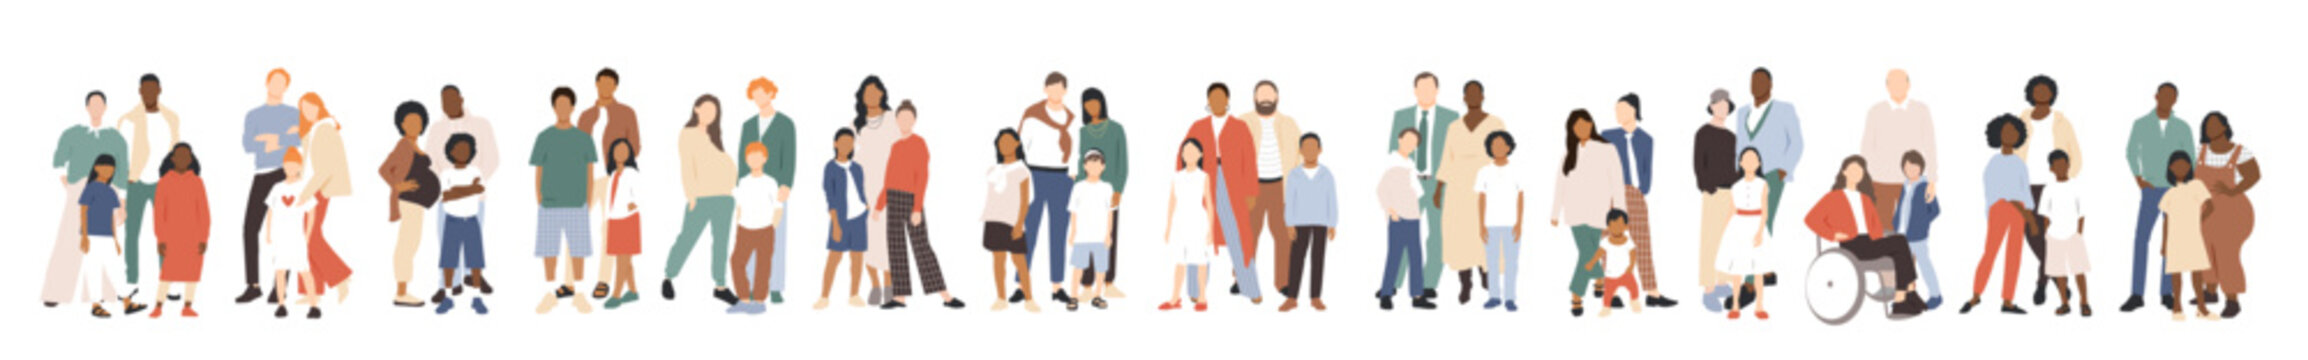 Multicultural group of mothers and fathers with kids. Flat vector illustration.